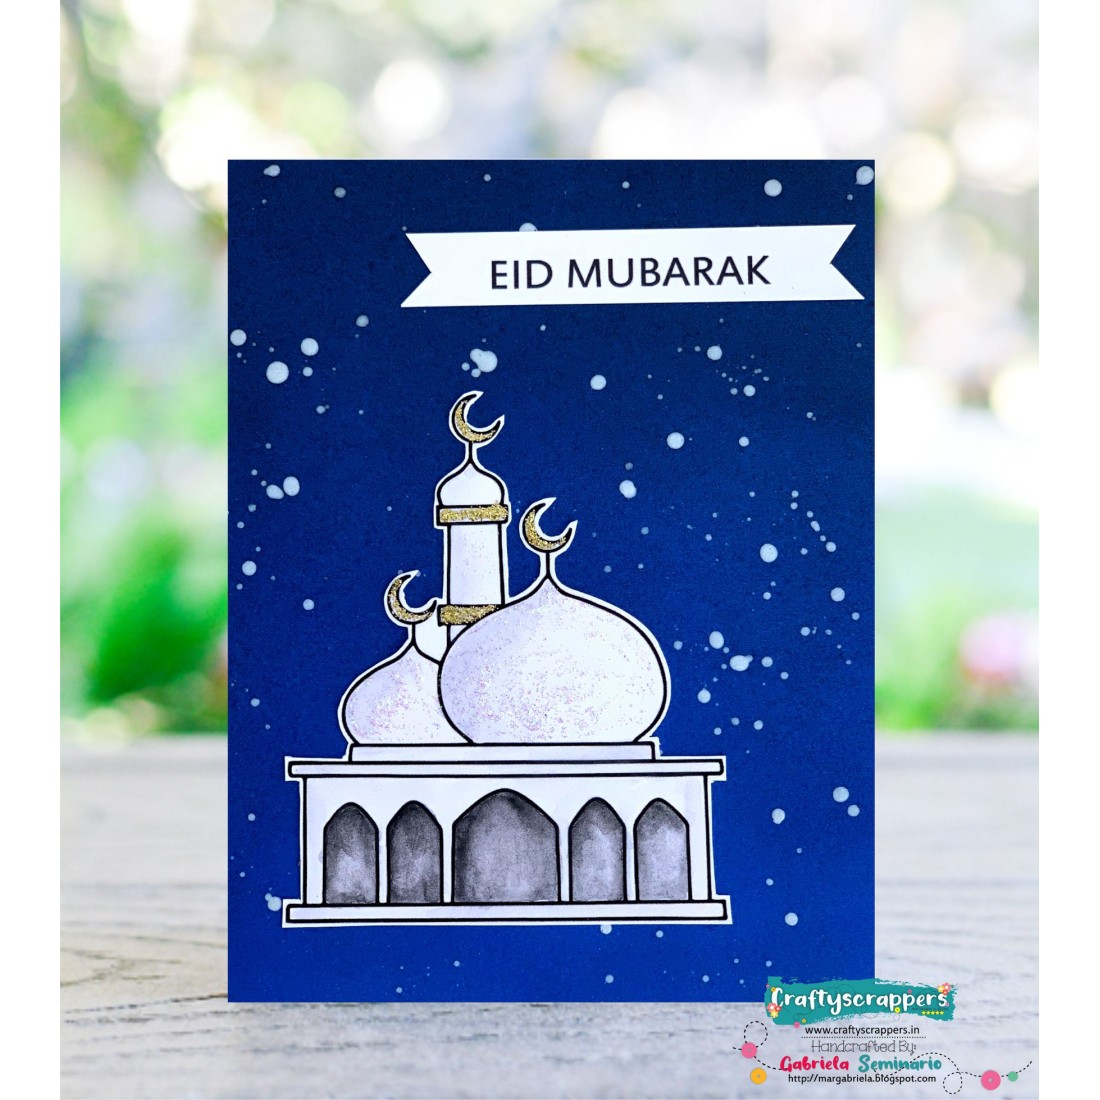 Craftyscrappers Stamps- CELEBRATE EID